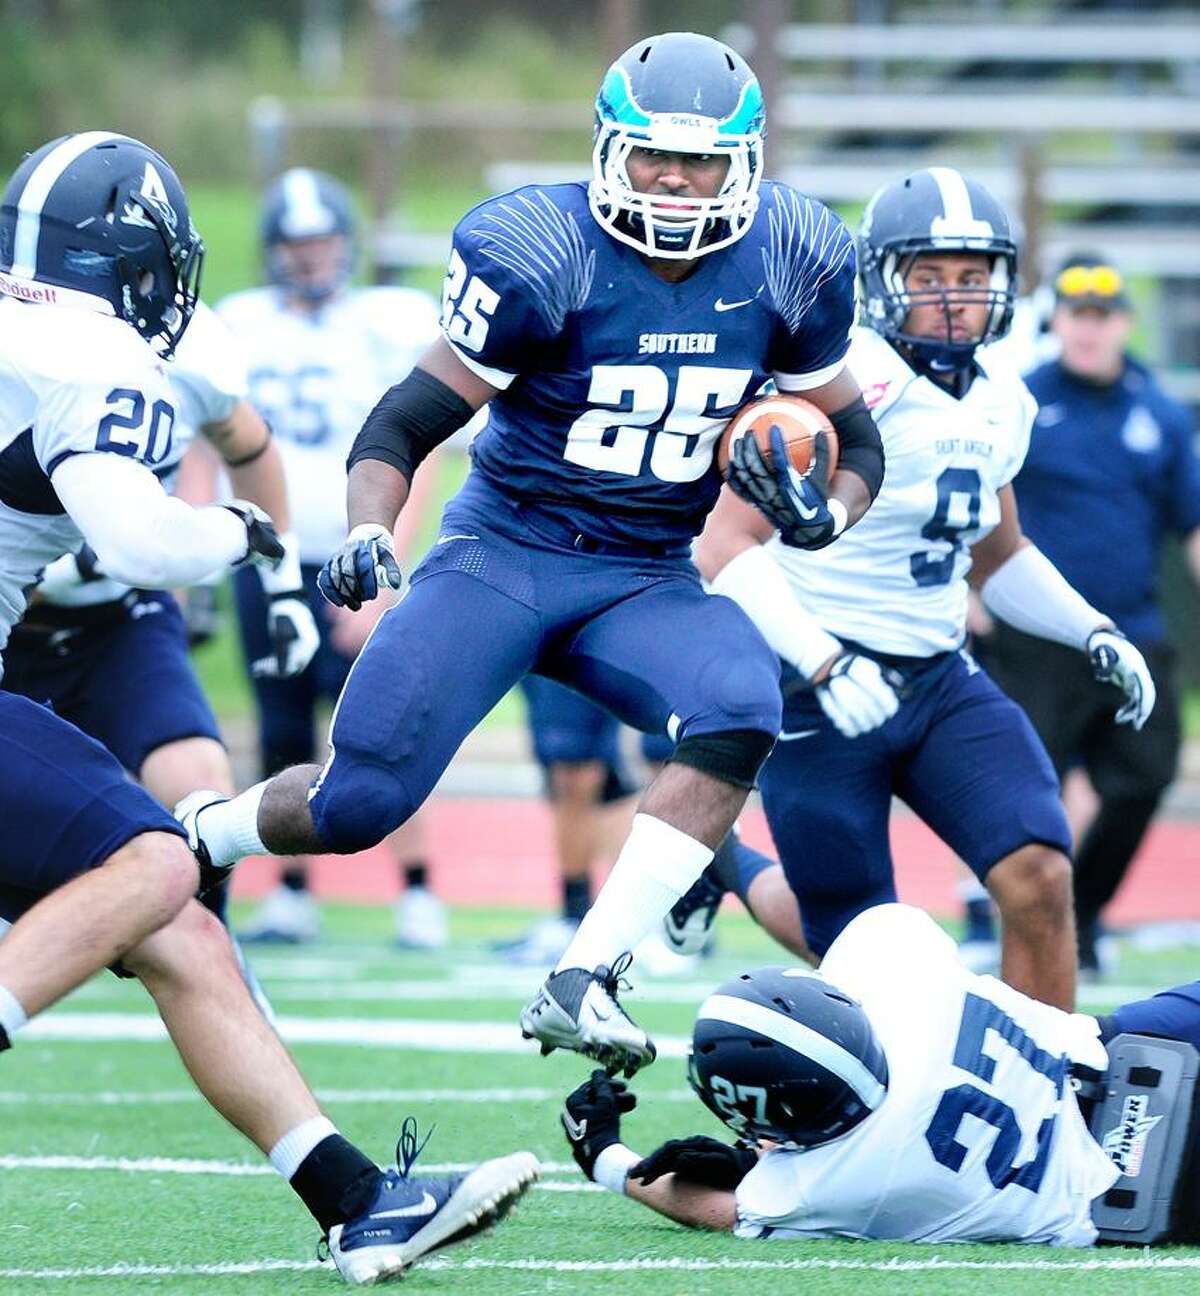 Vaughn Magee (center) of Southern runs through the St. Anselm defense in the first half on 9/29/2012.Photo by Arnold Gold/New Haven Register